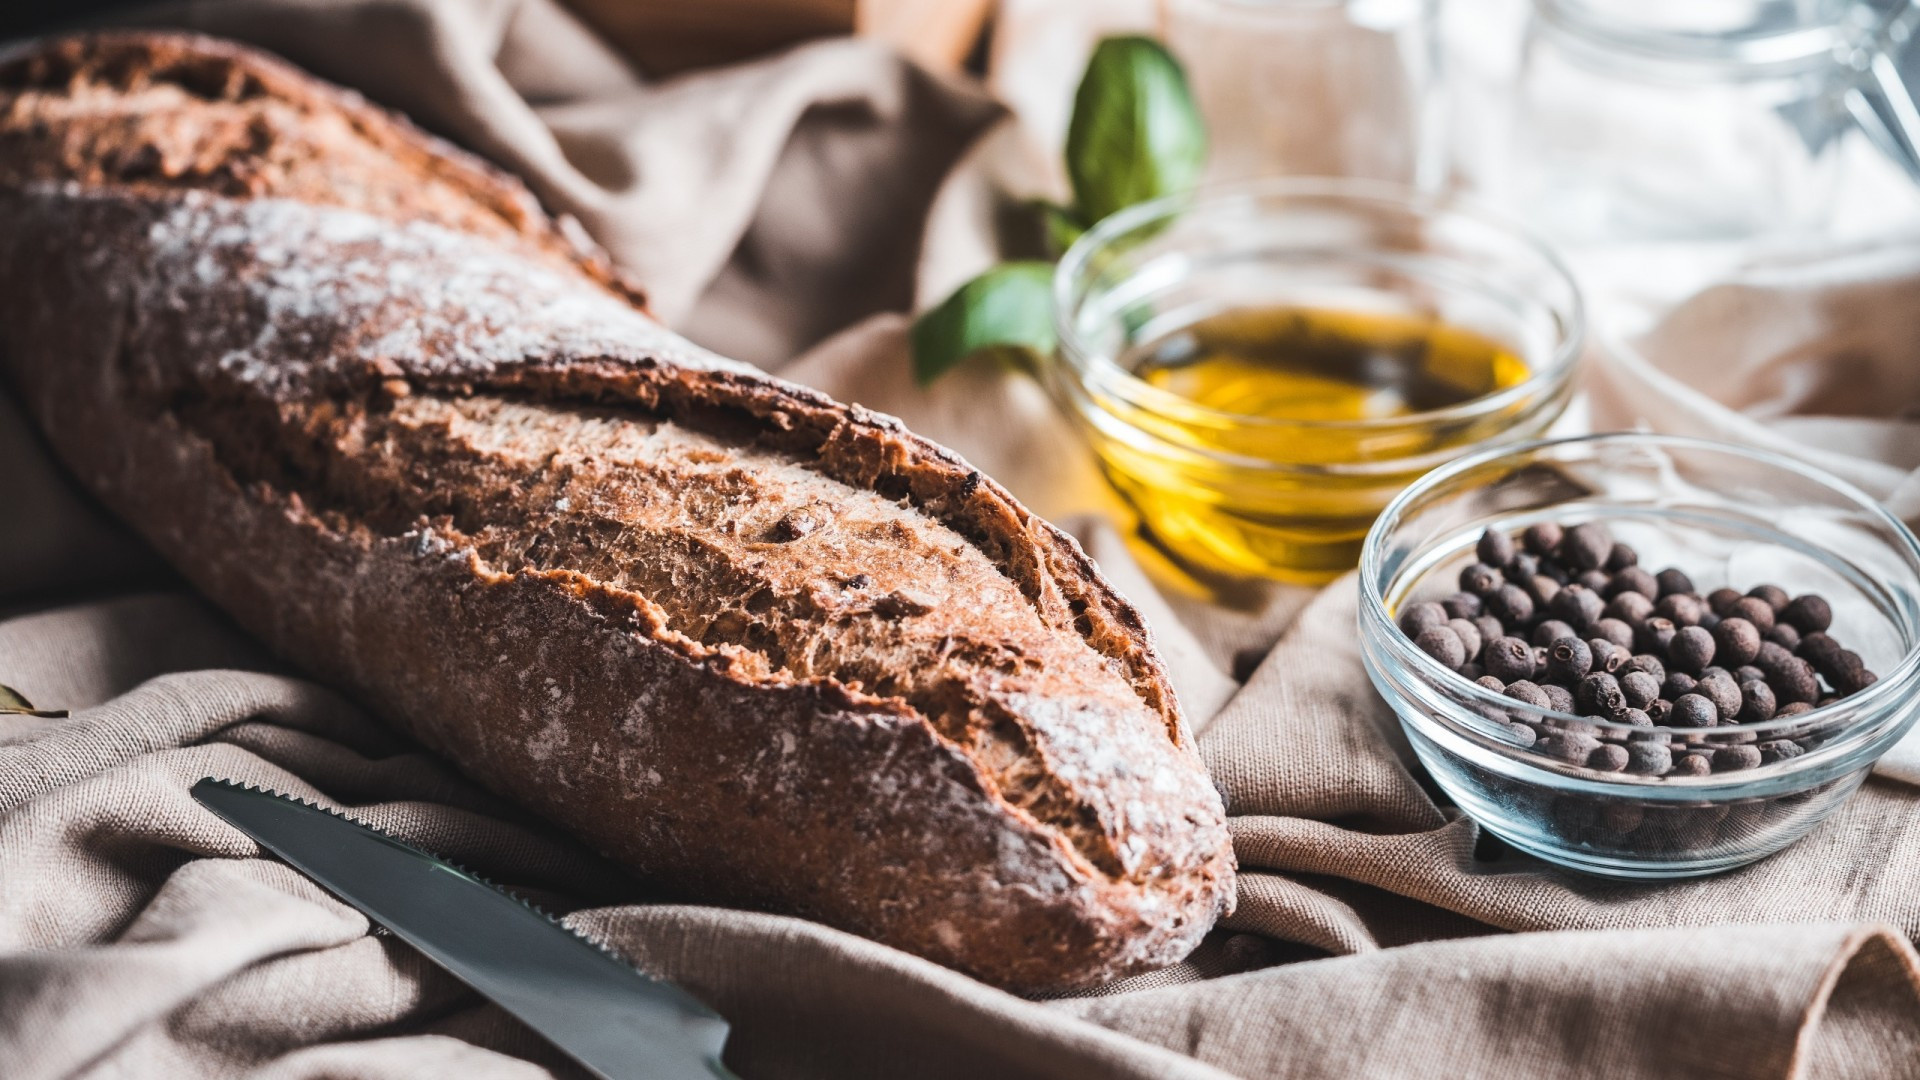 Bread and oil, Artistic food imagery, Widescreen wallpapers, Tasteful combination, 1920x1080 Full HD Desktop